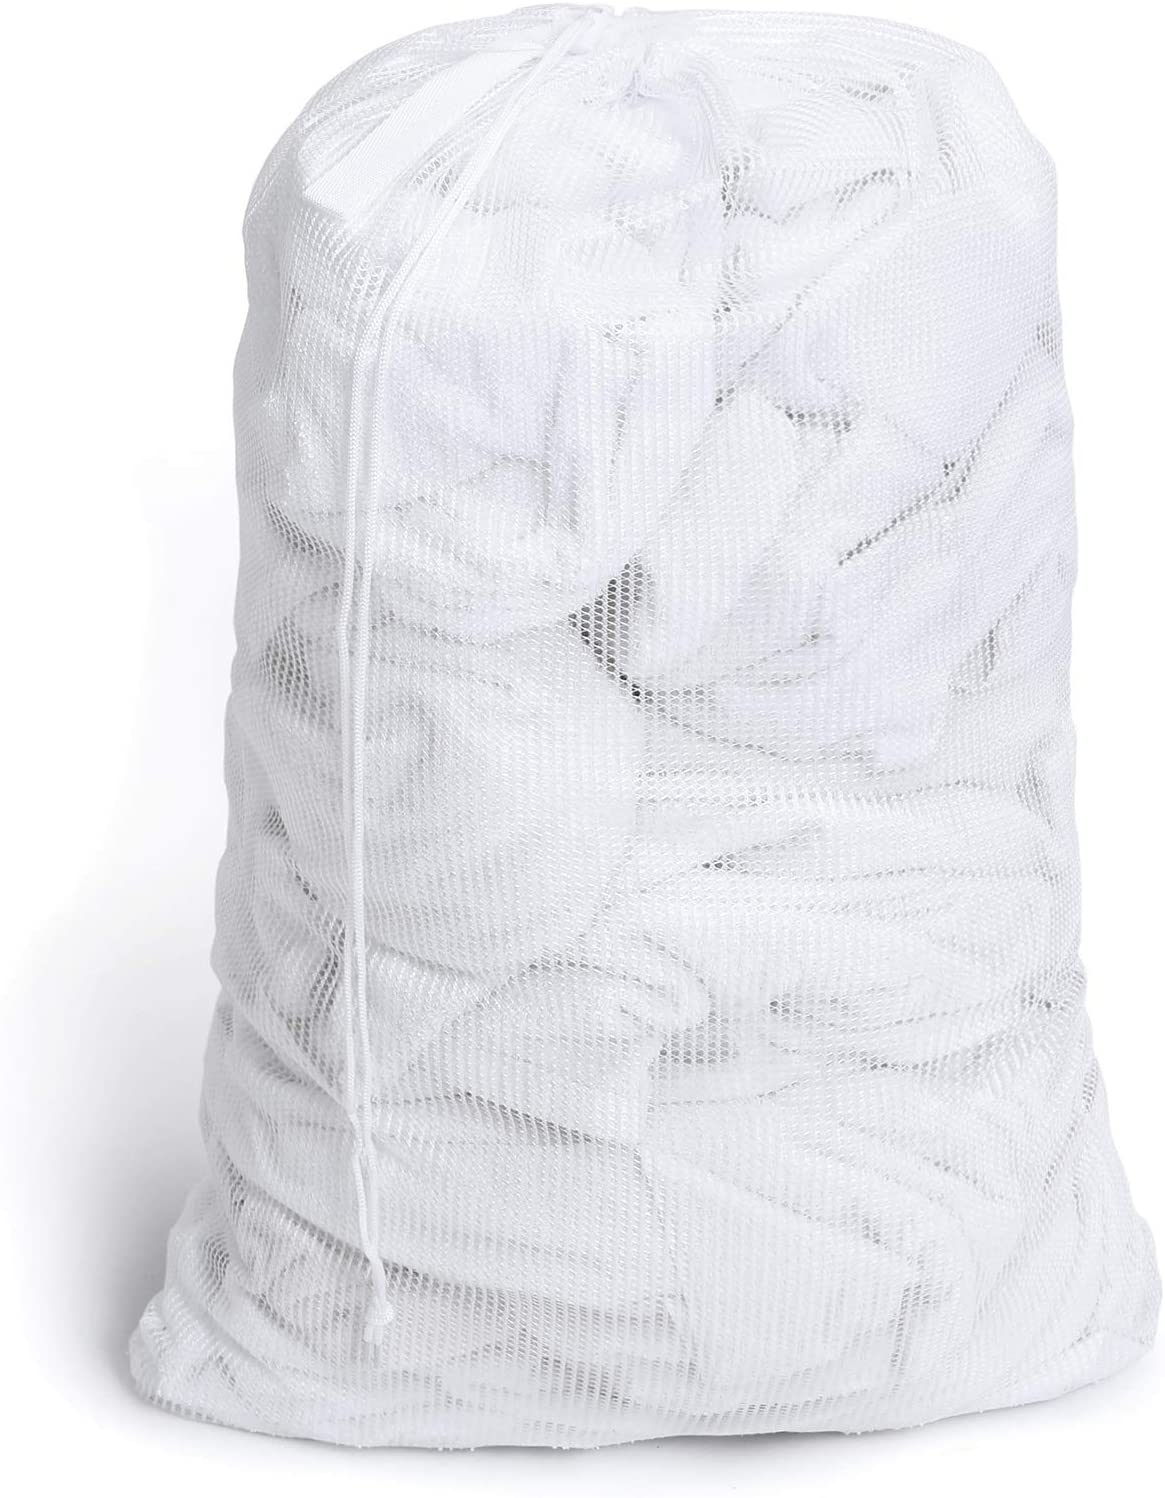 Mesh Laundry Bag with Handle and Push Lock Drawstring - Multiple Options - Smart Design® 50